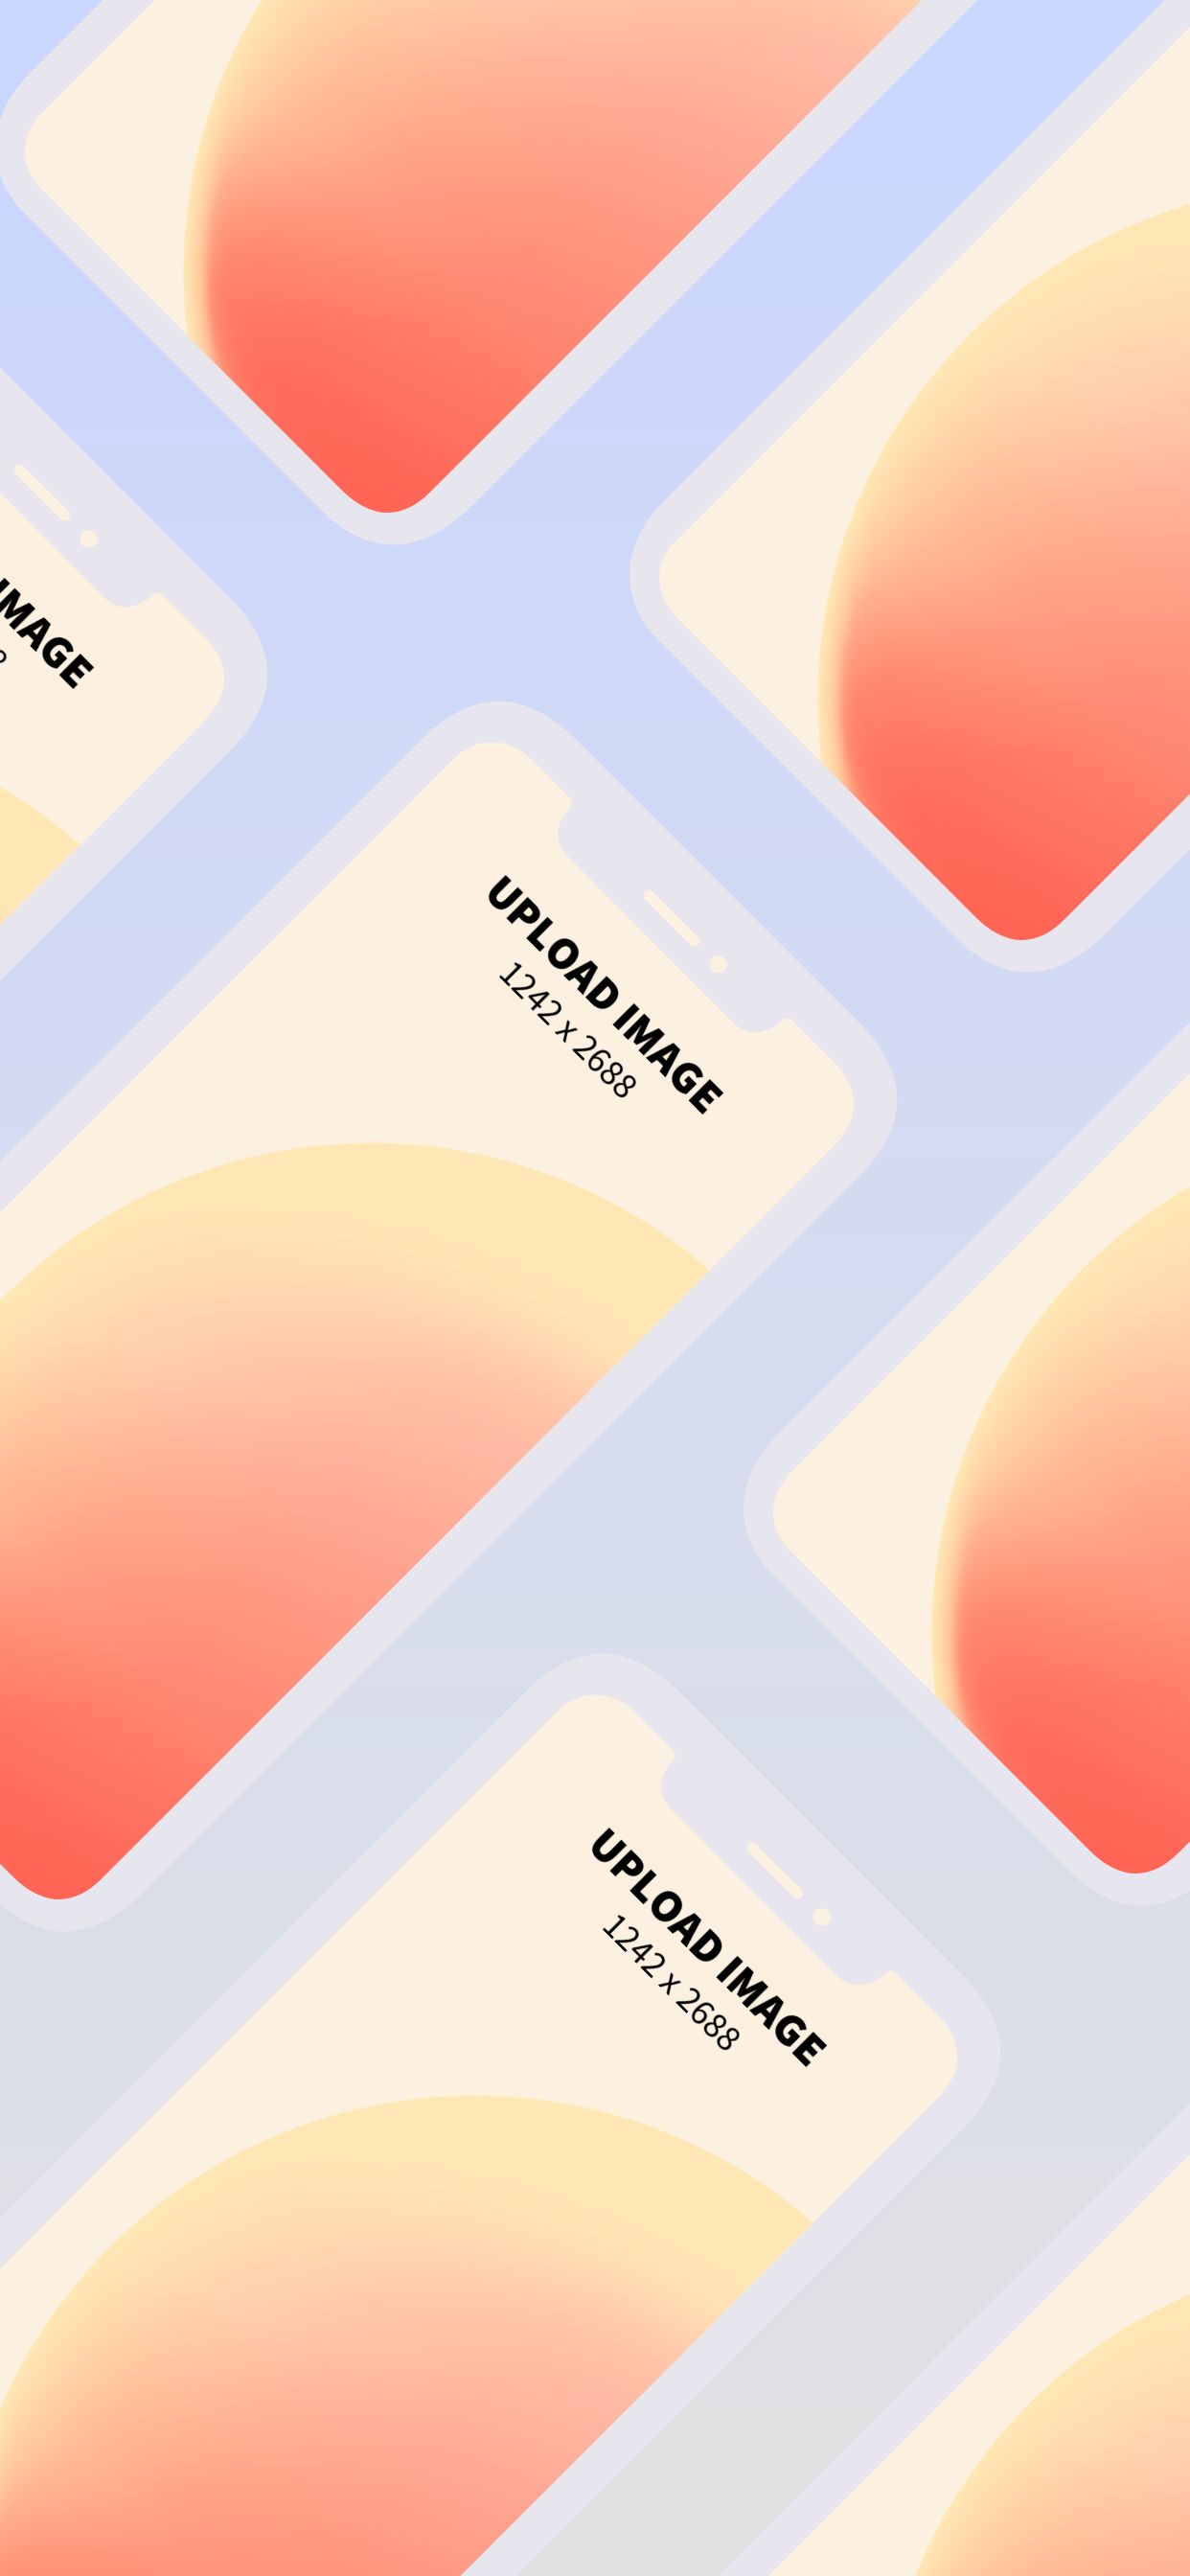 iPhone XS Max Screenshot 16 template. Quickly edit fonts, text, colors, and more for free.